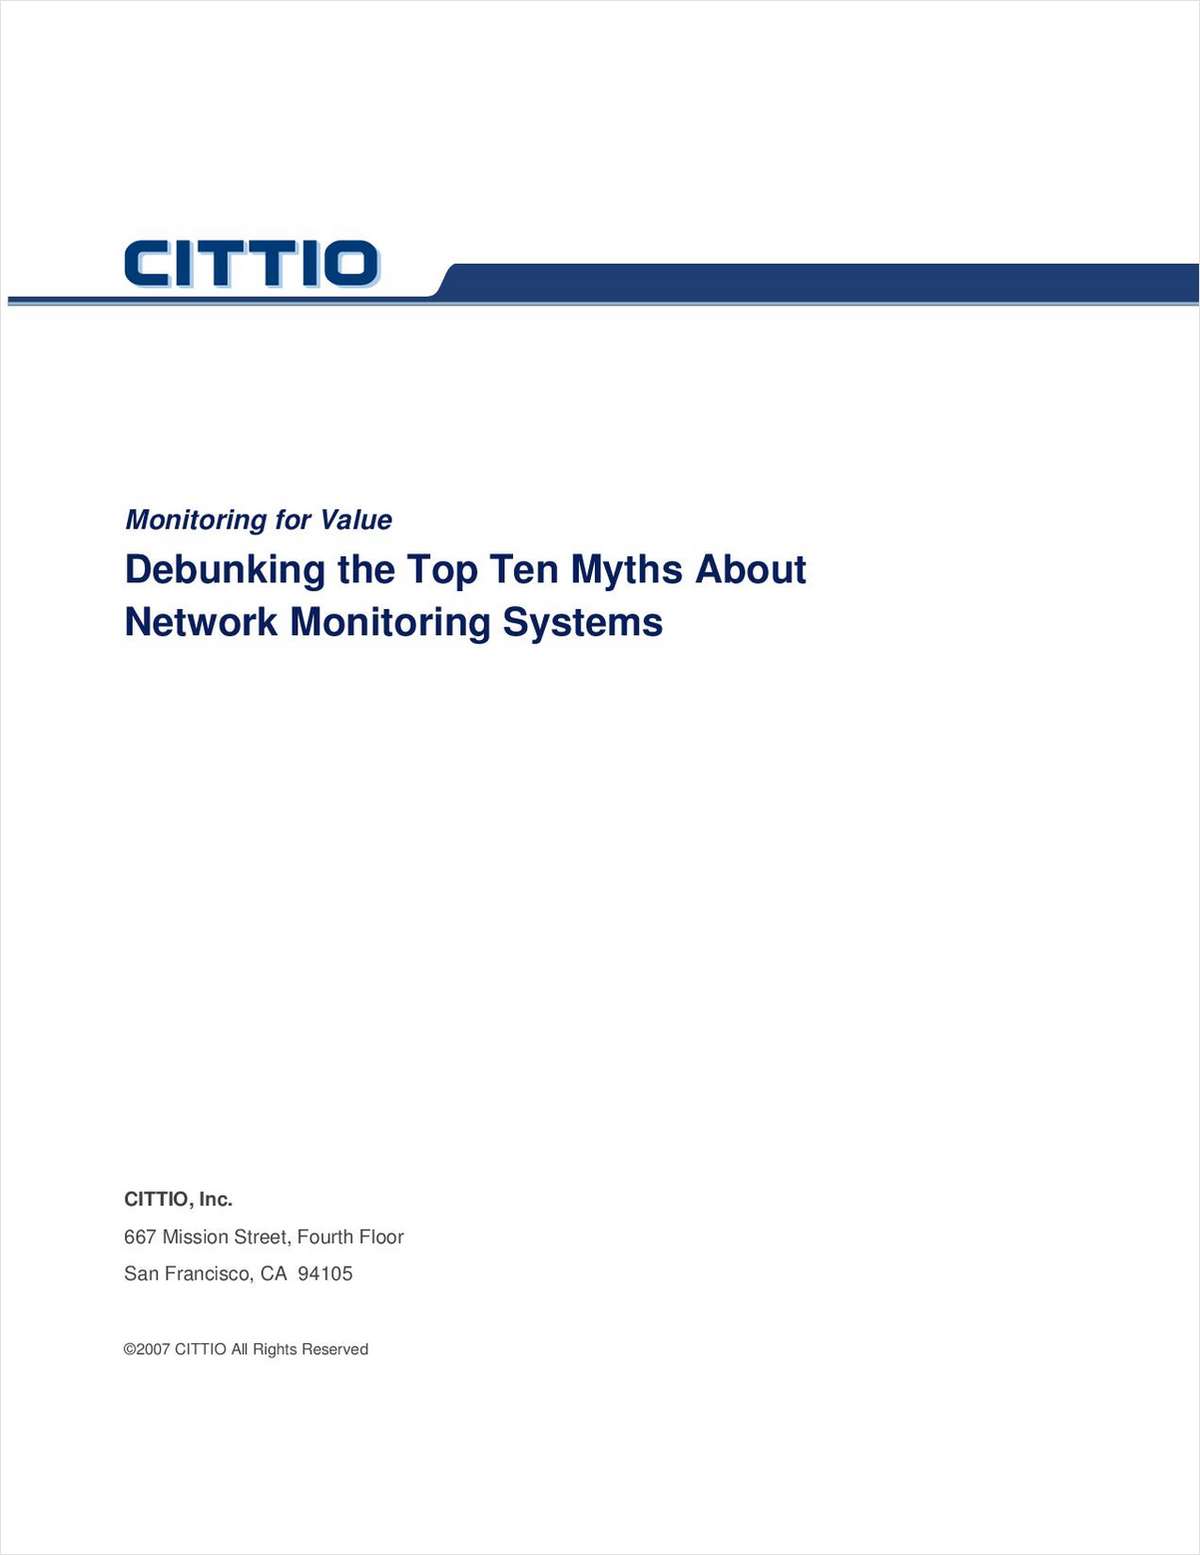 Debunking the Top Ten Myths About Network Monitoring Systems